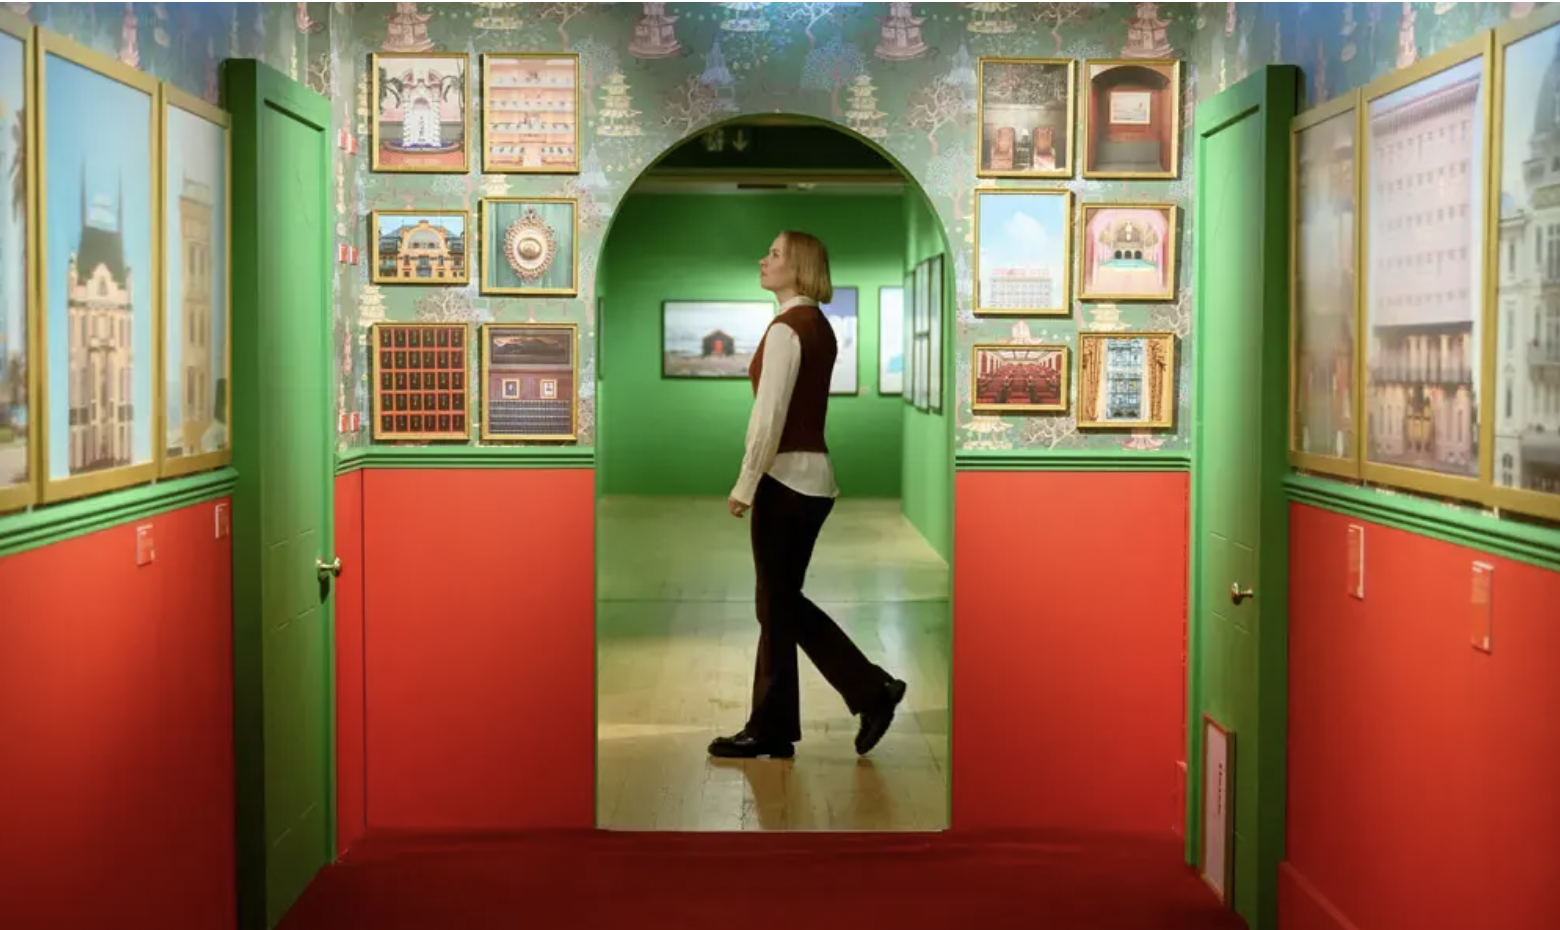 Home to over 100 photo-ops that place you right in a collection of classic Wes Anderson Films, this exhibit has been years in the making, and is finally open to the public for a short time.